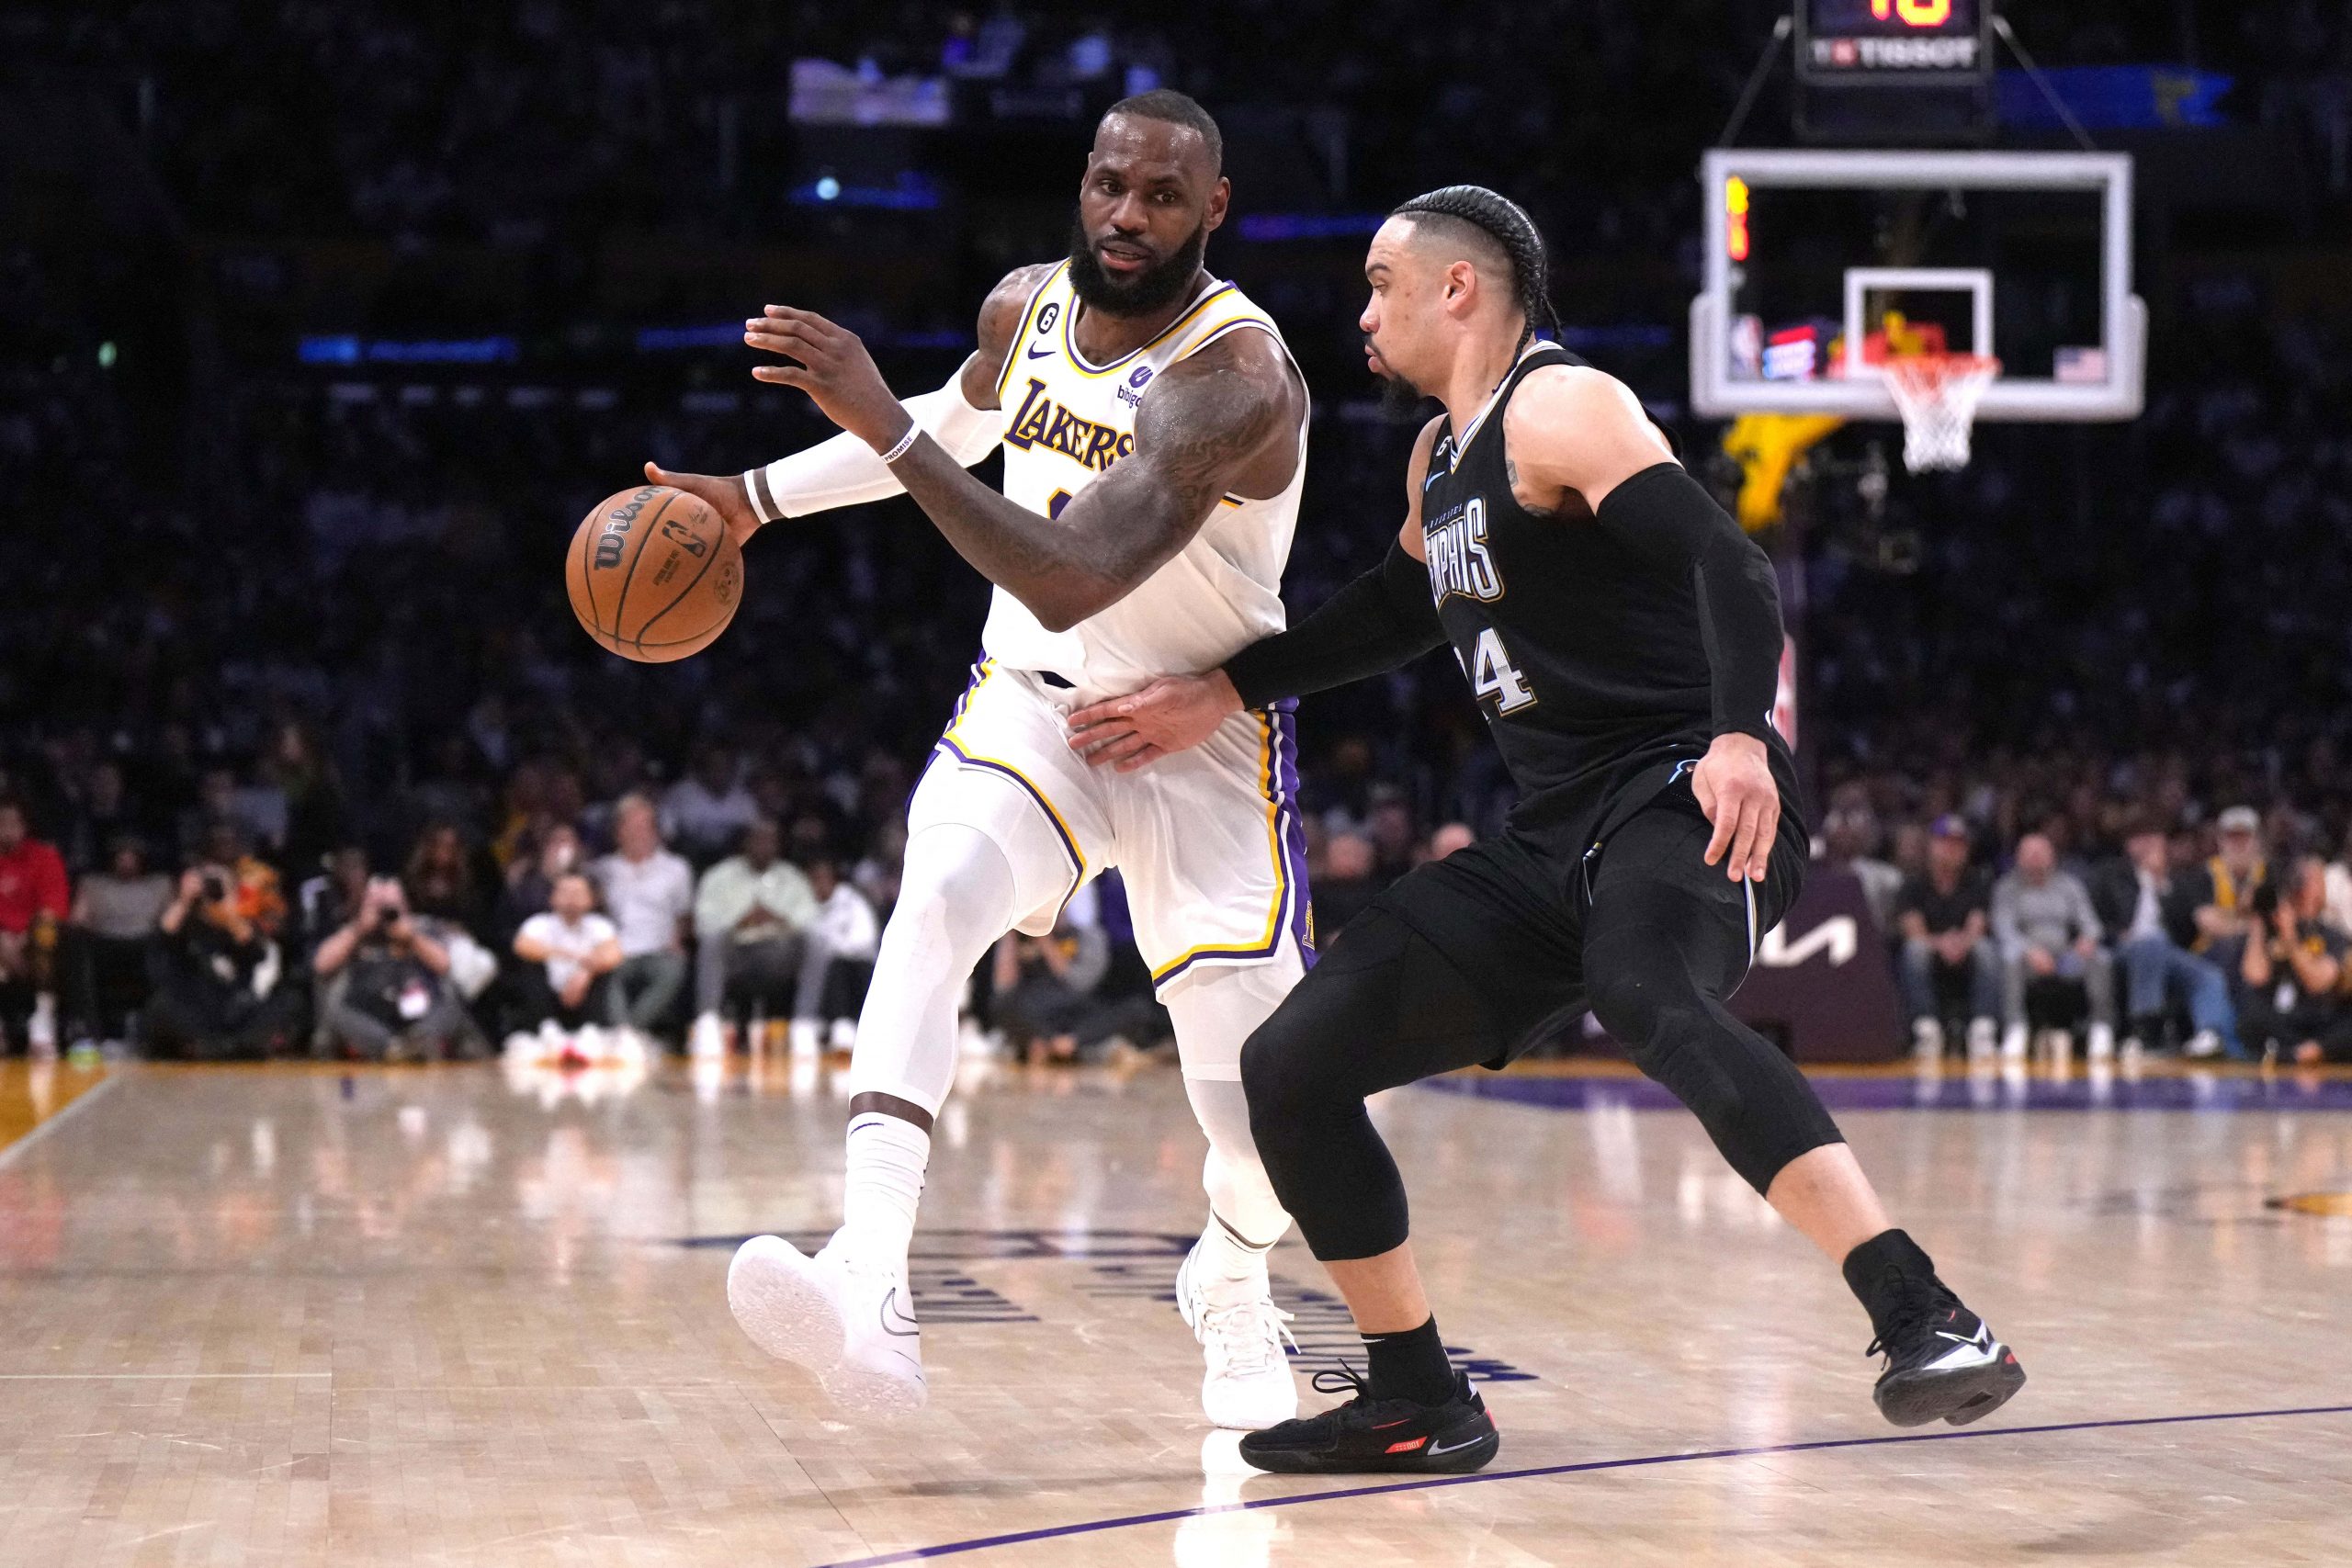 Apr 22, 2023; Los Angeles, California, USA; Los Angeles Lakers forward LeBron James (6) dribbles the ball against Memphis Grizzlies forward Dillon Brooks (24) in the second quarter during game three of the 2023 NBA playoffs at Crypto.com Arena. Mandatory Credit: Kirby Lee-USA TODAY Sports Photo: Kirby Lee/REUTERS